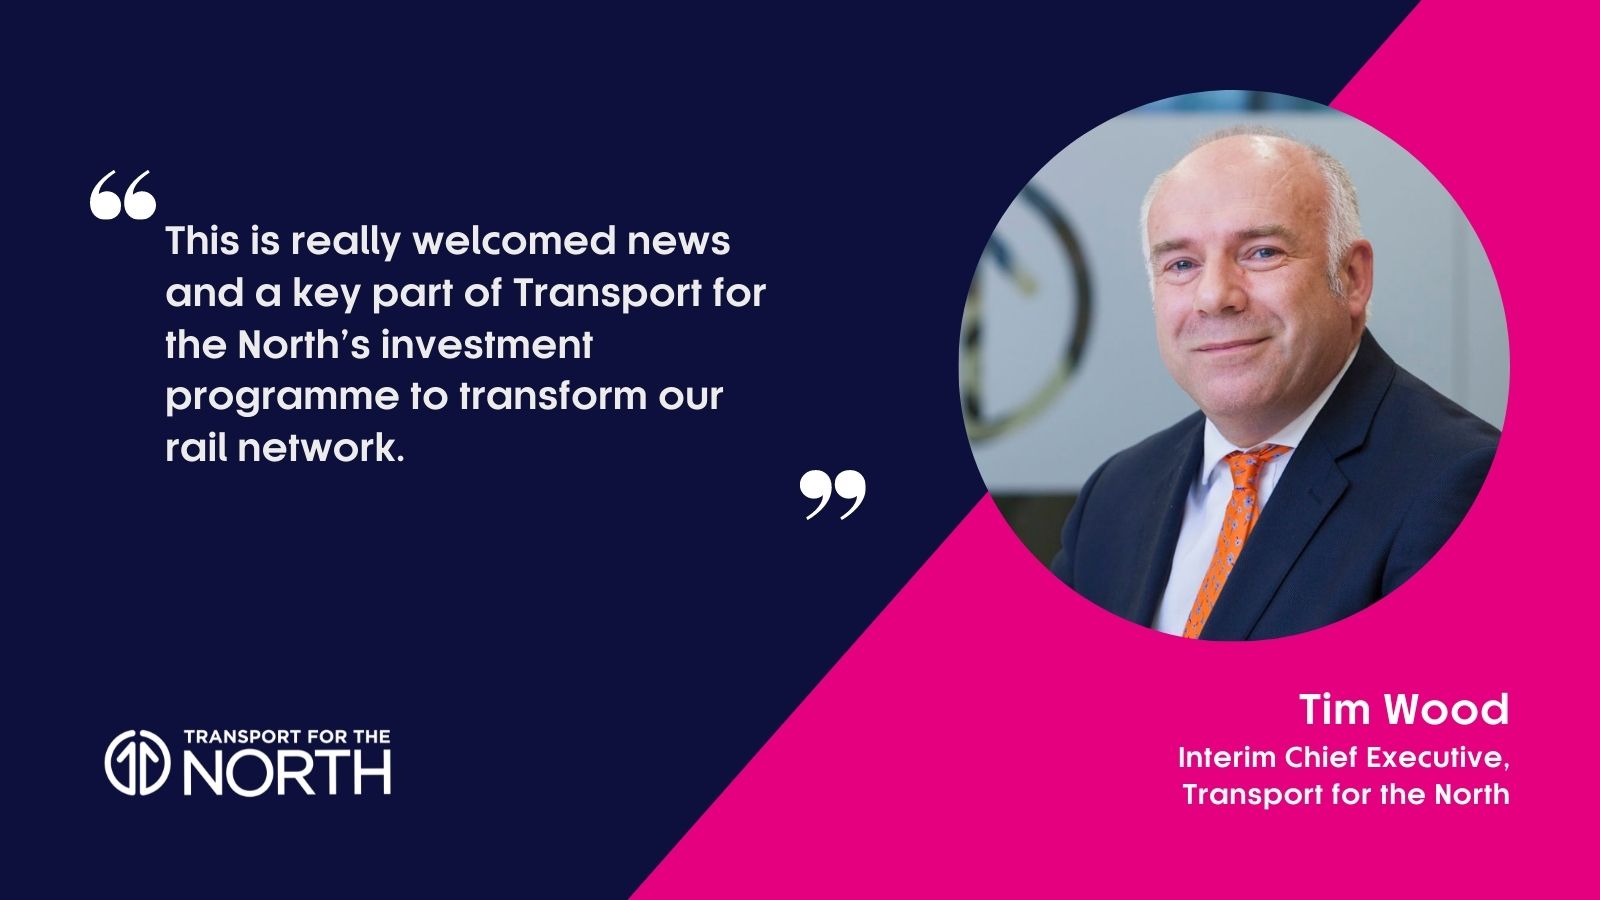 Tim Wood, Interim Chief Executive at Transport for the North on the Transpennien Route Upgrade funding